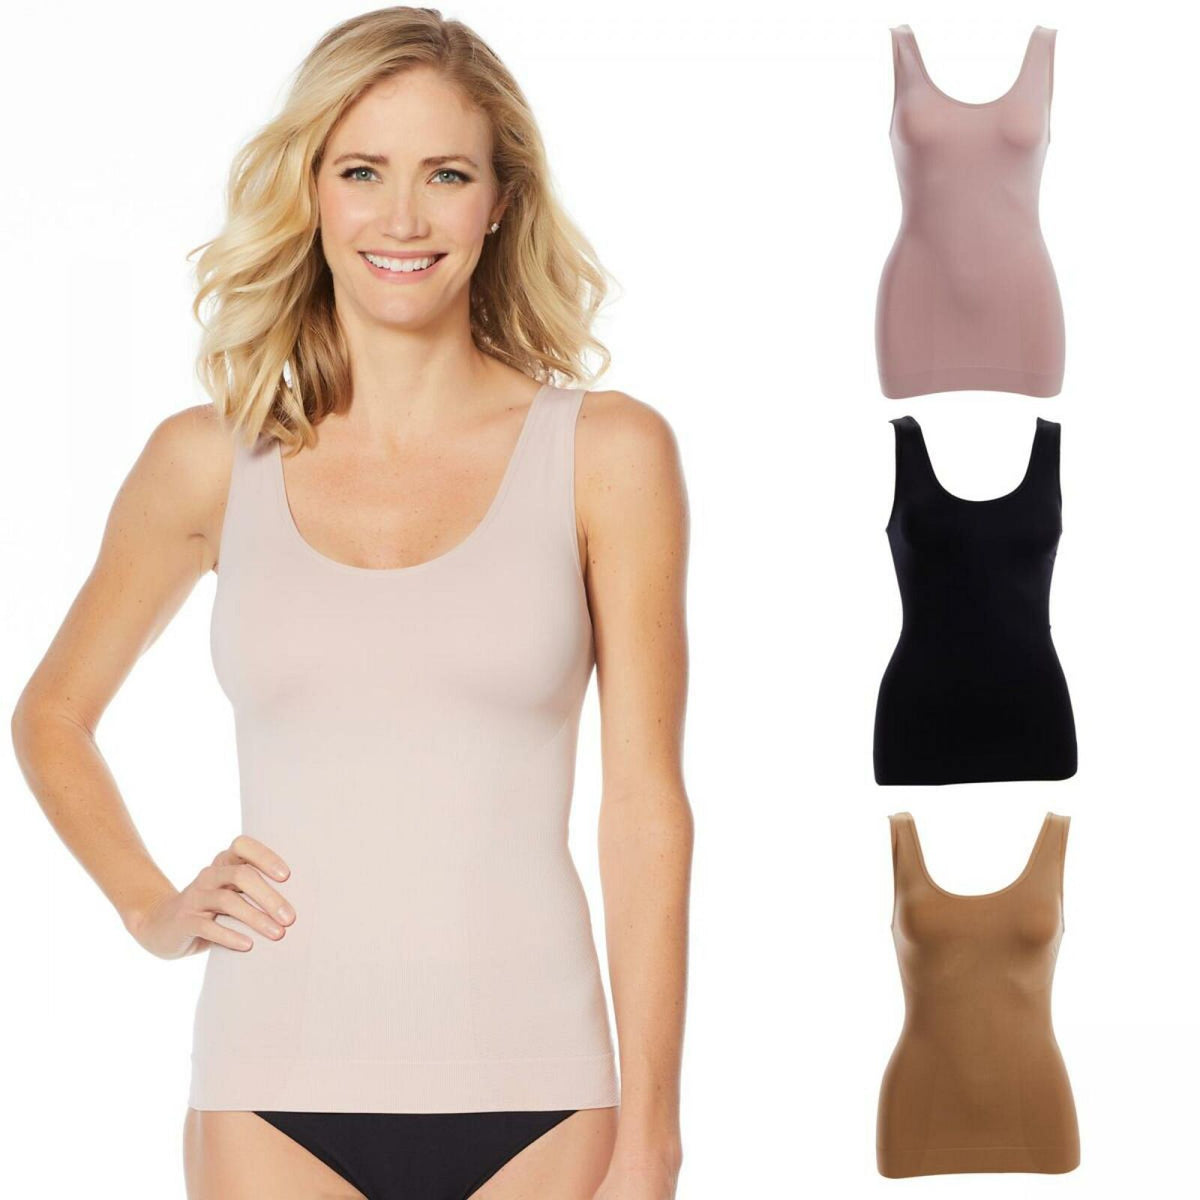 Nearly Nude Women's Plus Size 3 Pack Seamless Shaping Tank Tops